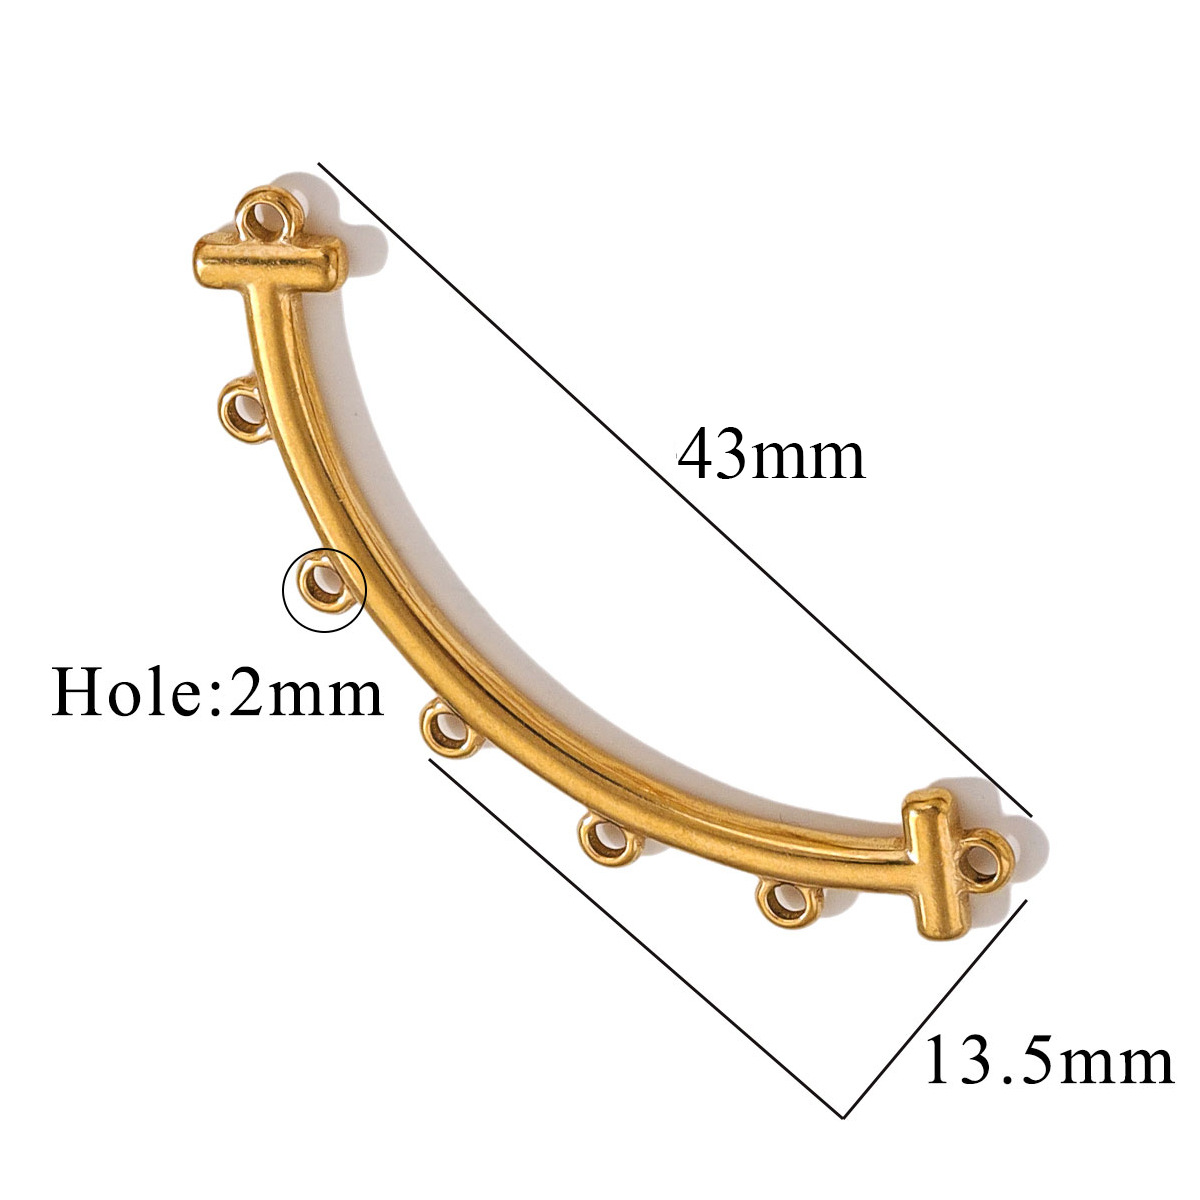 8:Gold - 43mm